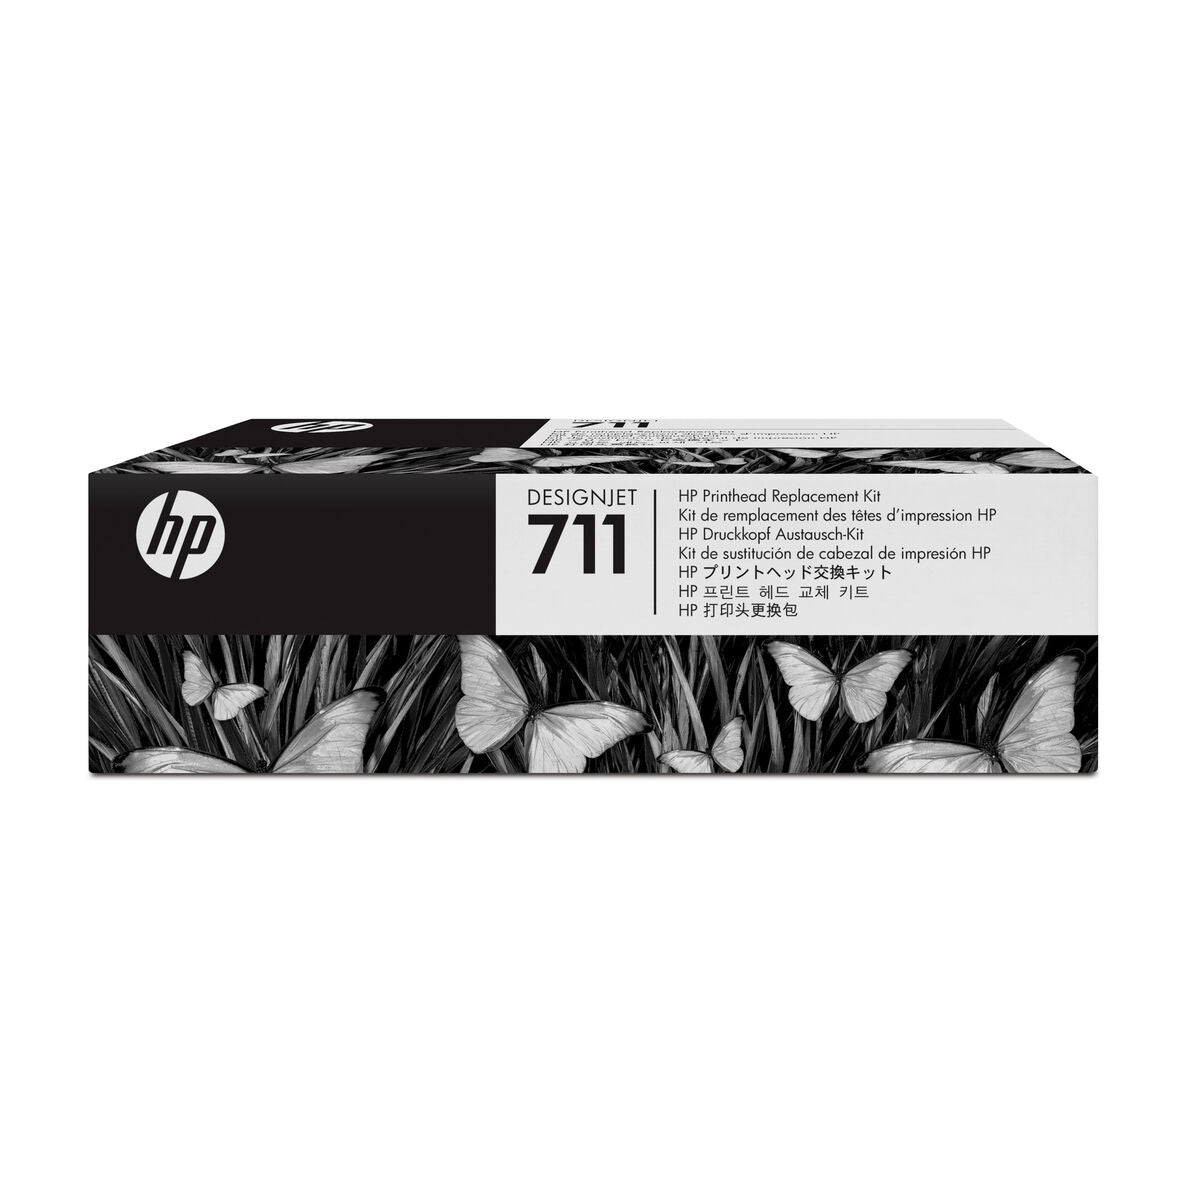 Replacement Head HP DesignJet 711 Multicolour, HP, Computing, Printers and accessories, replacement-head-hp-designjet-711-multicolour, Brand_HP, category-reference-2609, category-reference-2642, category-reference-2645, category-reference-t-19685, category-reference-t-19911, category-reference-t-21377, computers / peripherals, Condition_NEW, office, Price_200 - 300, Teleworking, RiotNook